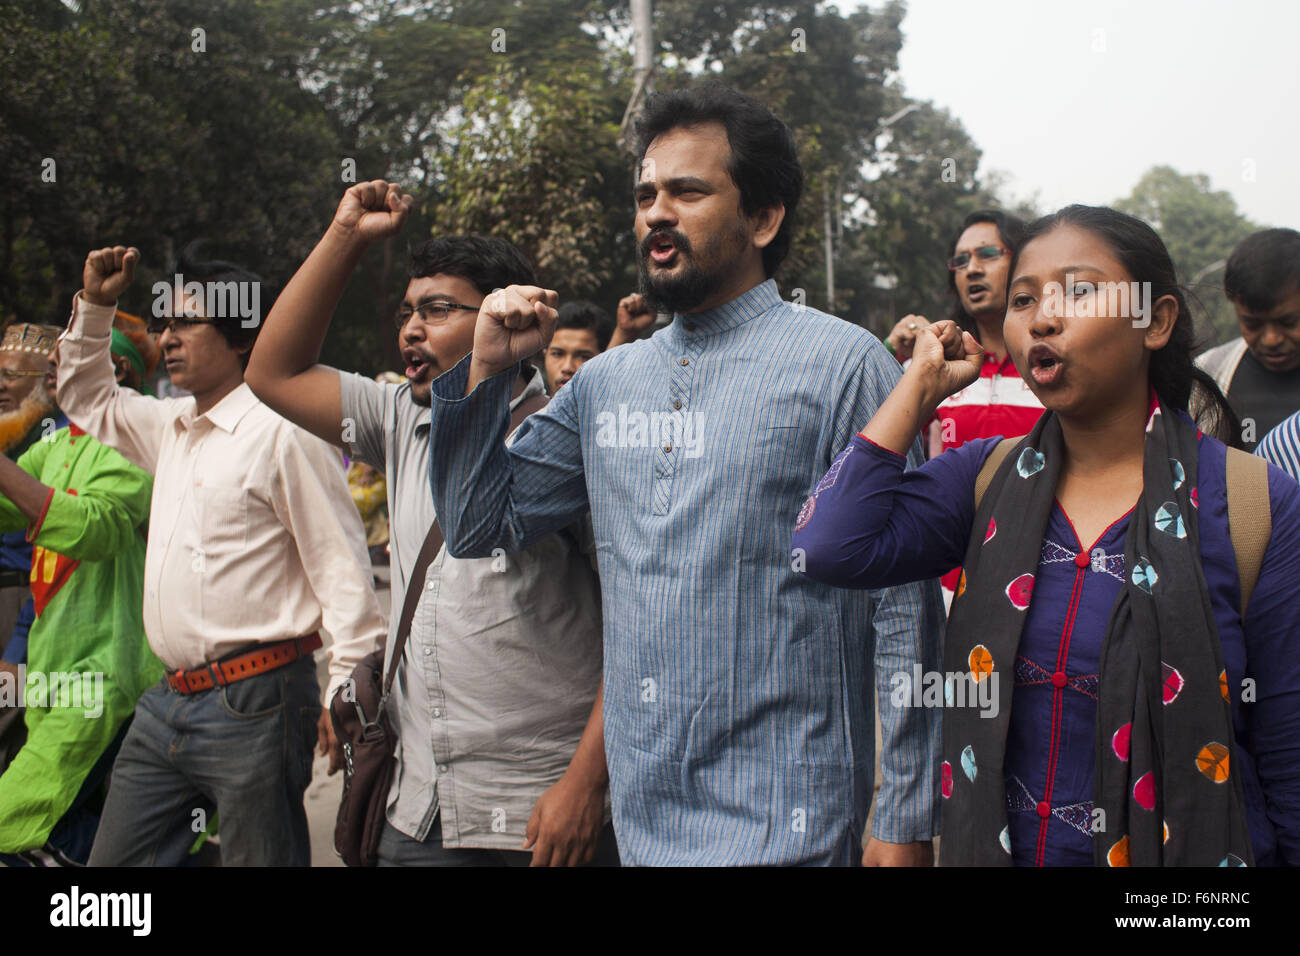 Dhaka, Bangladesh. 18th Nov, 2015. Bangladeshi Social activist bring out procession following the sentencing of war-crime convicts Ali Ahsan Mohammad Mujahid and Salauddin Quader Chowdhury. The Supreme Court has upheld the death sentences of war-crime convicts Ali Ahsan Mohammad Mujahid and Salauddin Quader Chowdhury. Salauddin Quader, infamous as Chittagong's wartime terror, was sentenced to death by a war crimes tribunal on Oct 1, 2013 for his role in the mass killing and torture of Hindus and Awami League supporters. Credit:  ZUMA Press, Inc./Alamy Live News Stock Photo